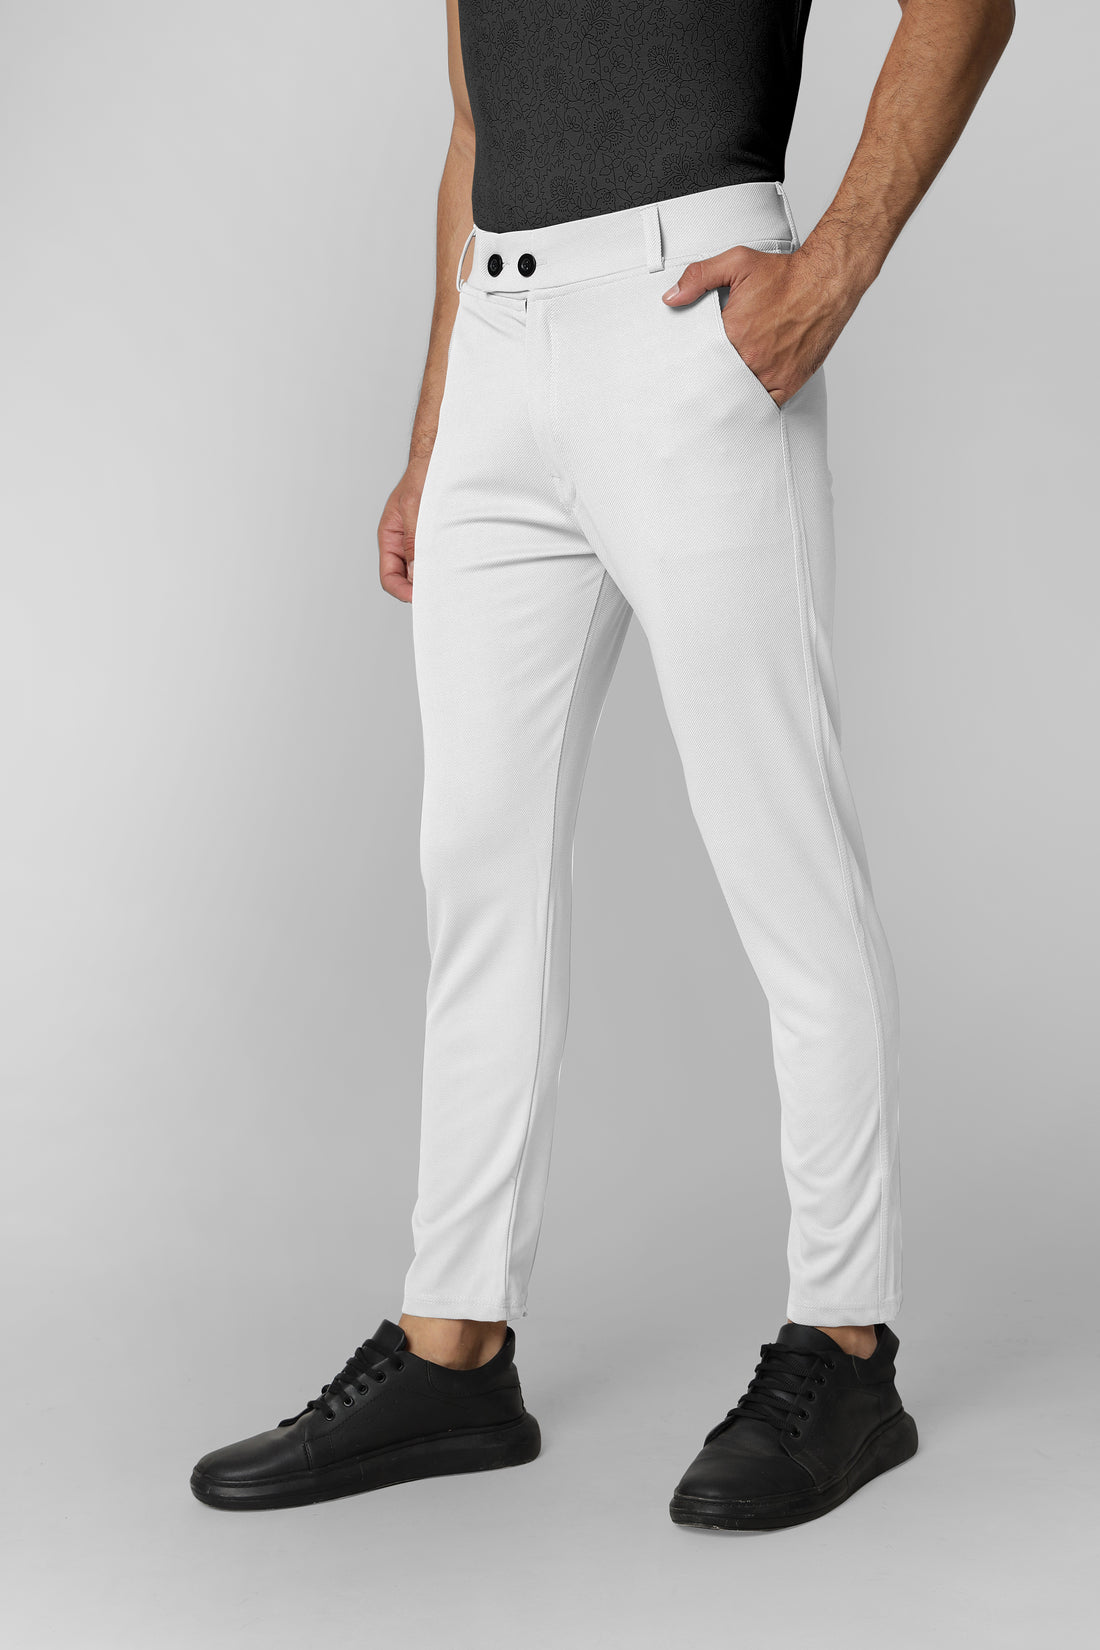 White Lycra Stretchable Formal Slim Fit  Trouser Pant